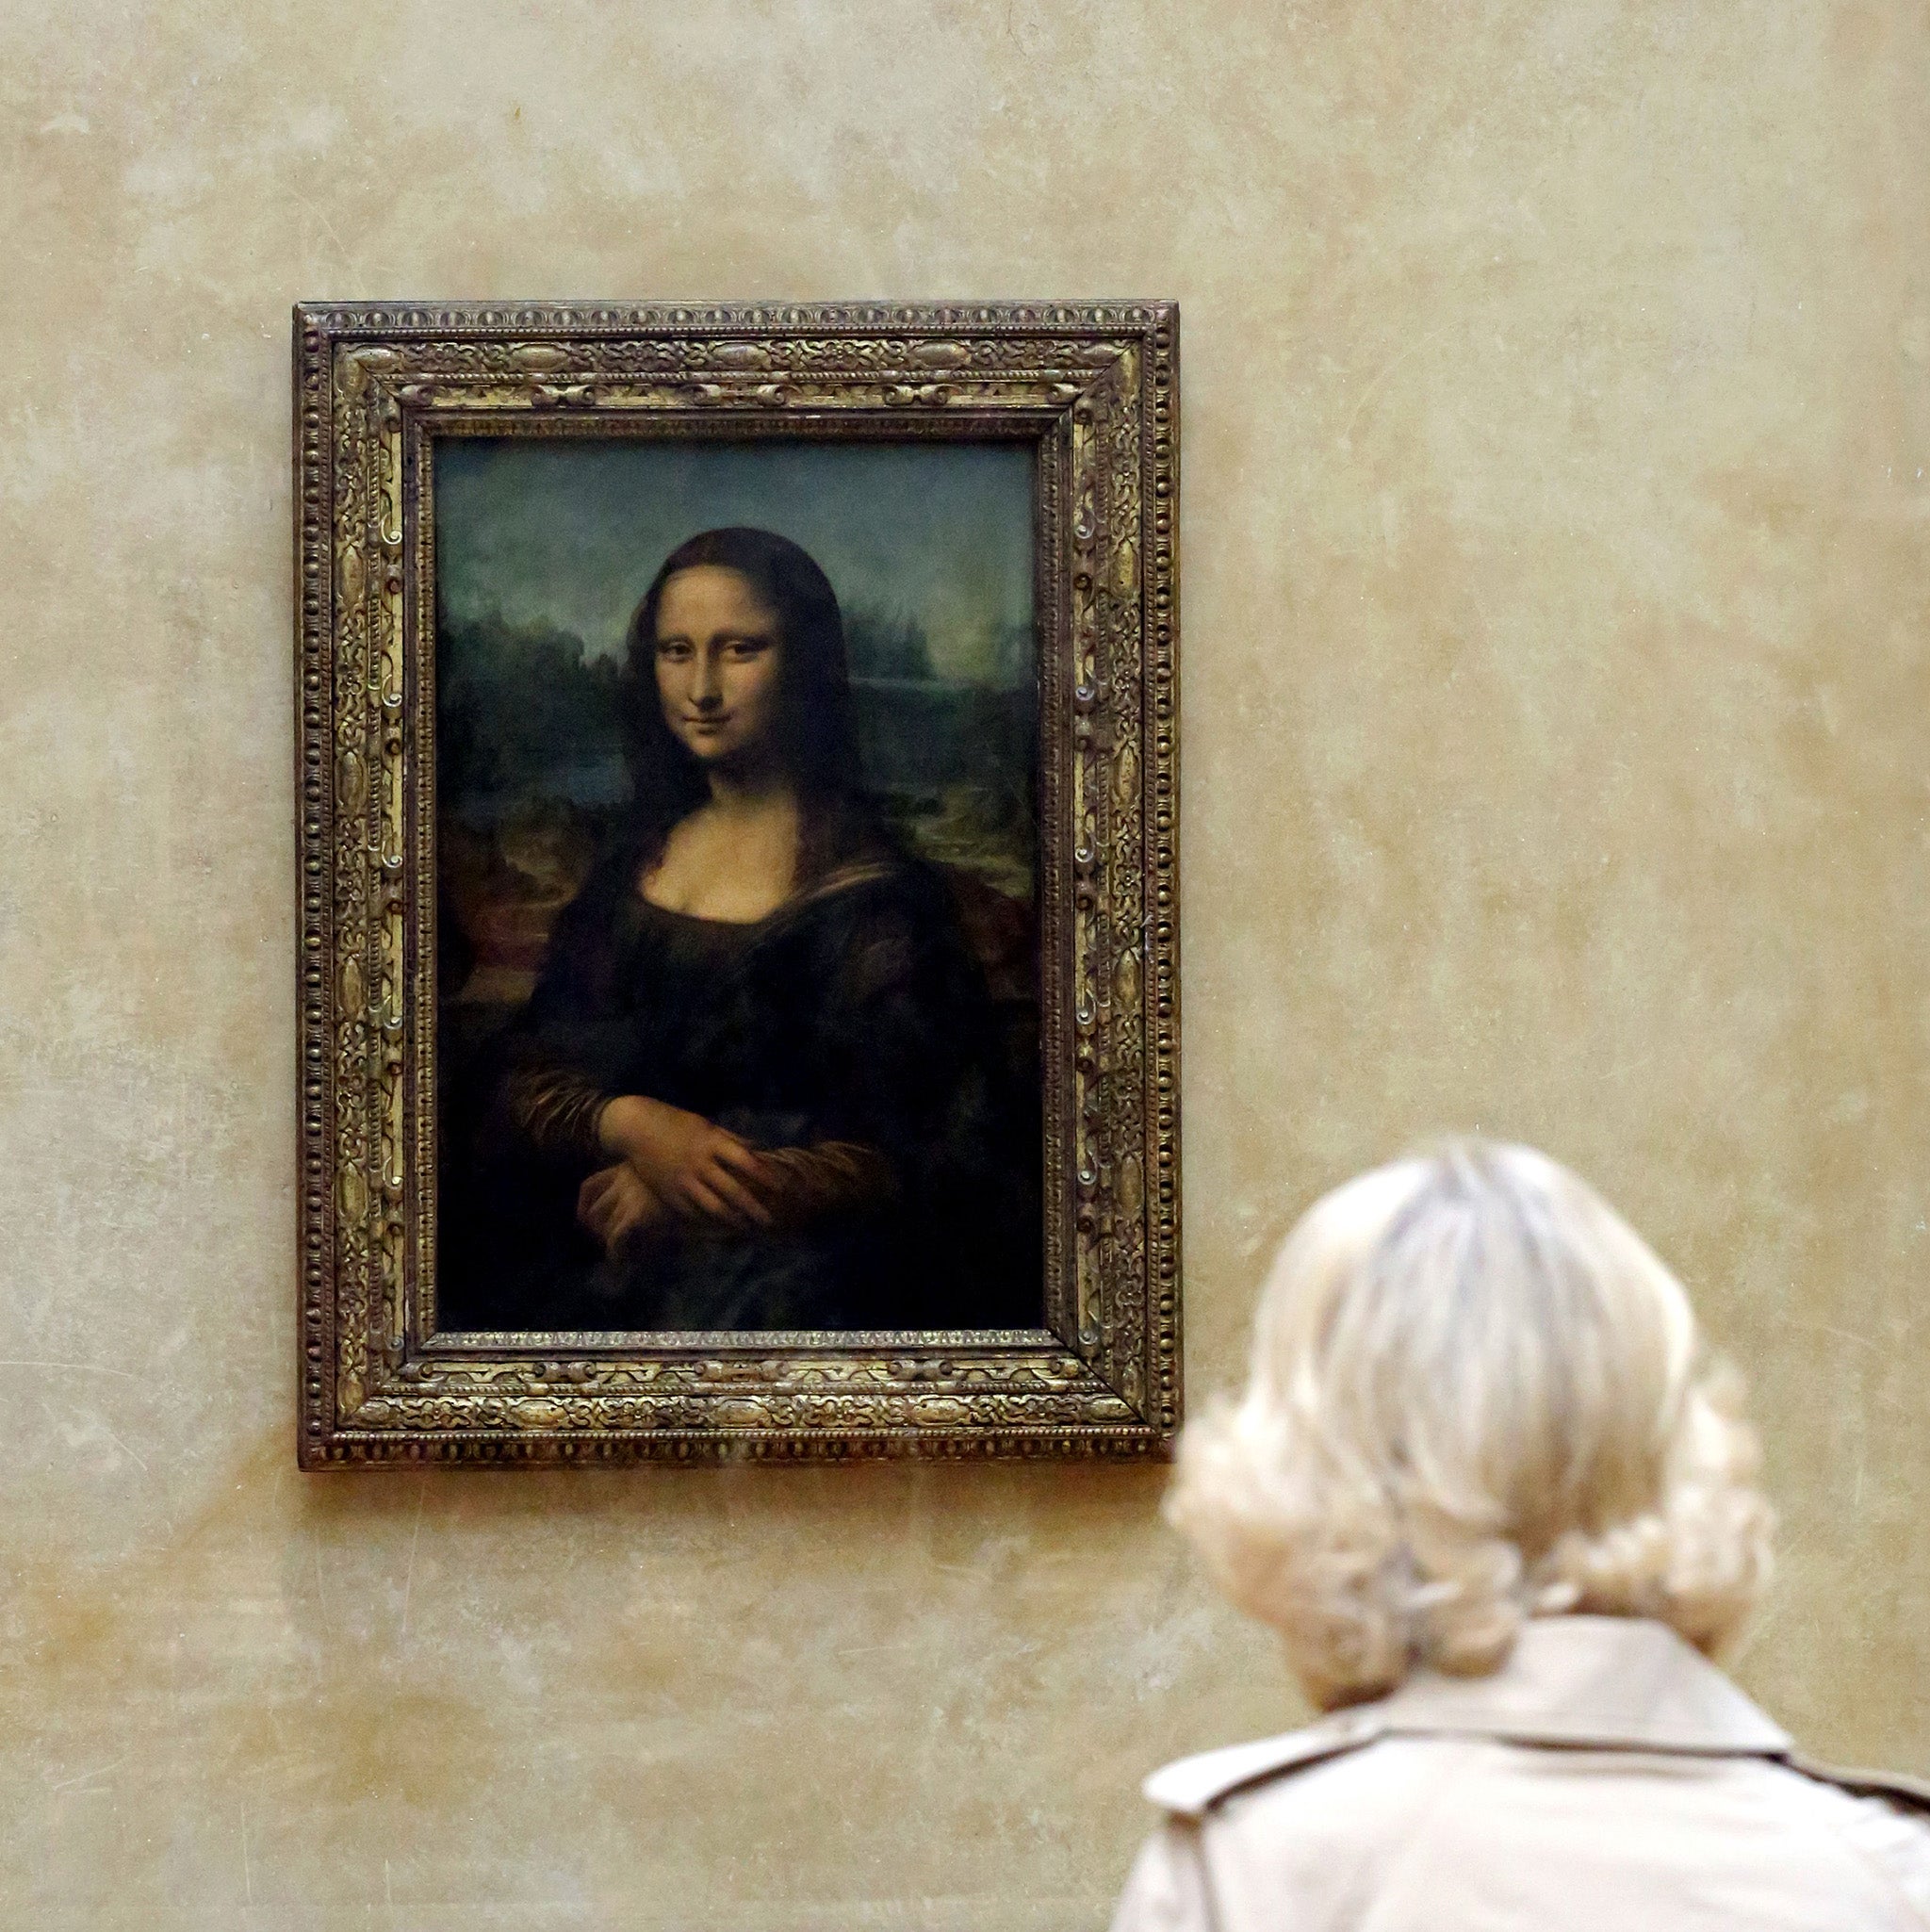 Art experts consider the ‘Mona Lisa’ to be an unfinished work